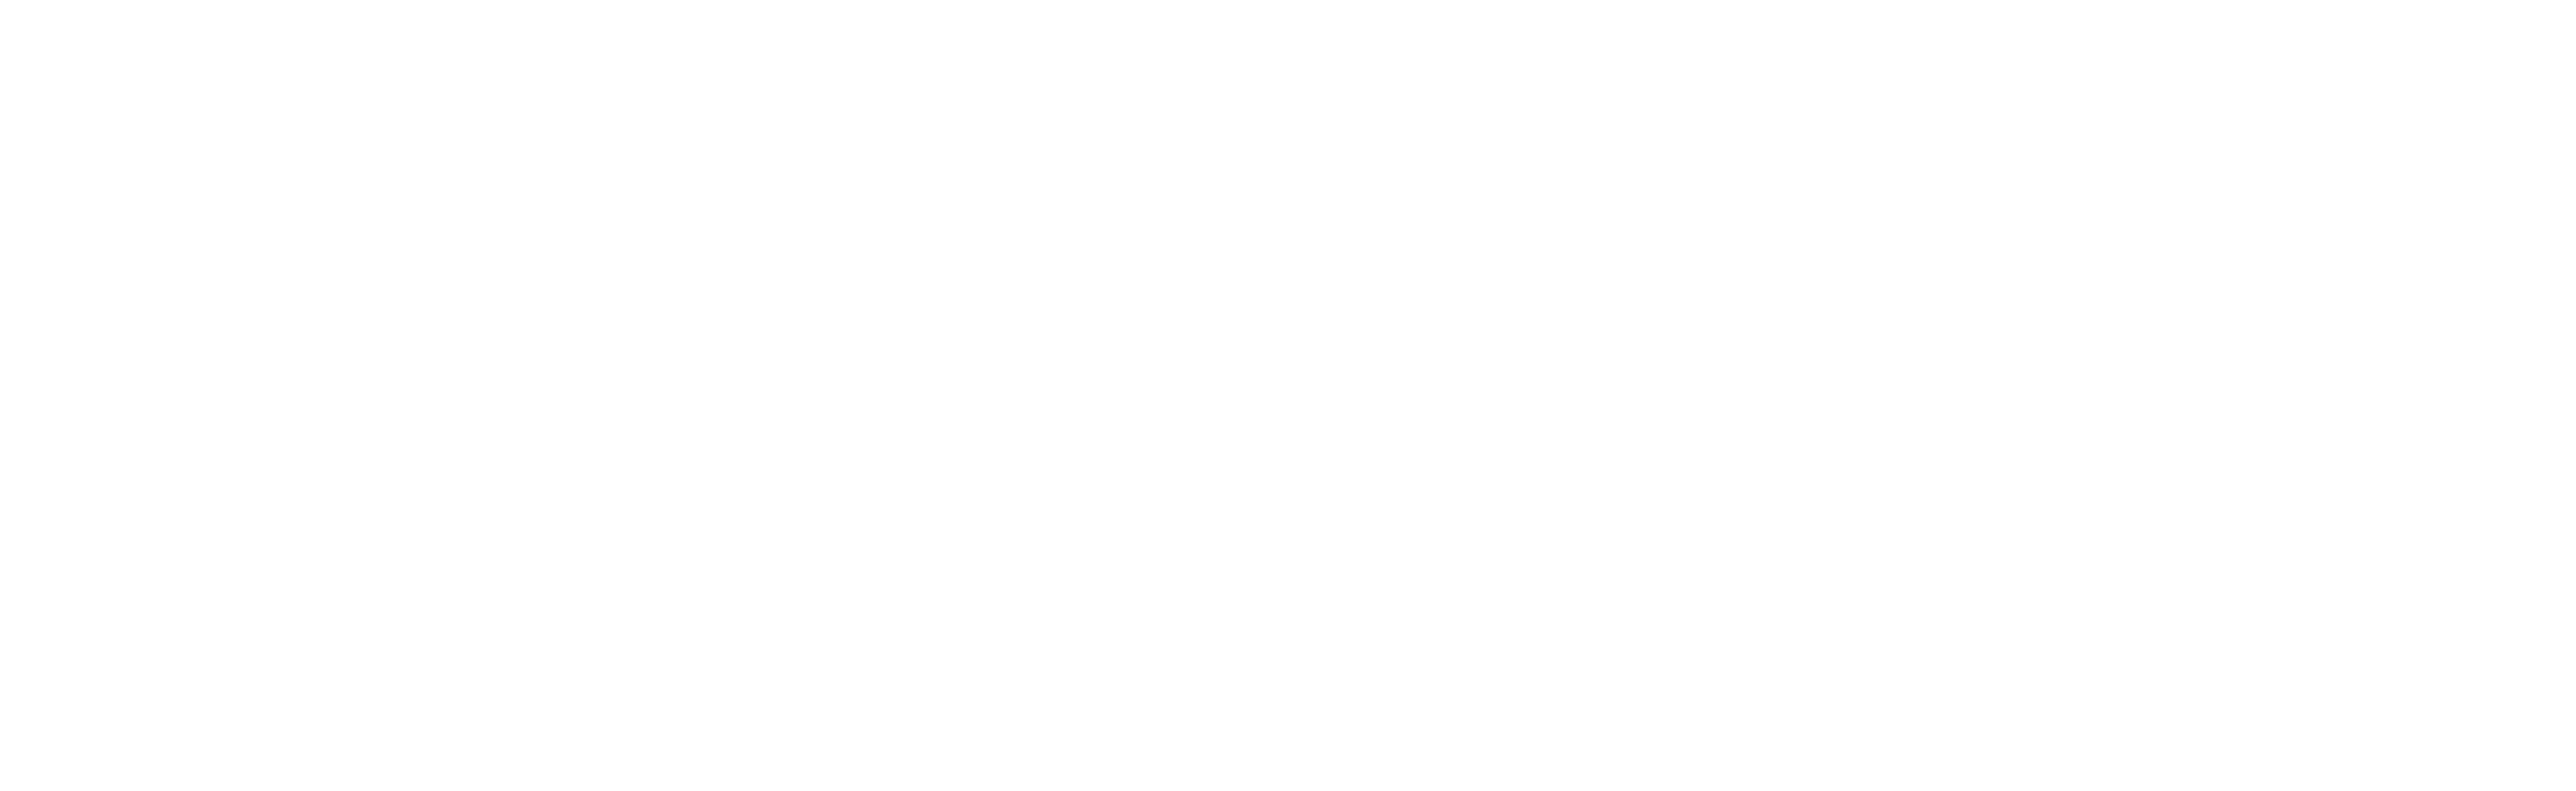 MFH Commercial Realty